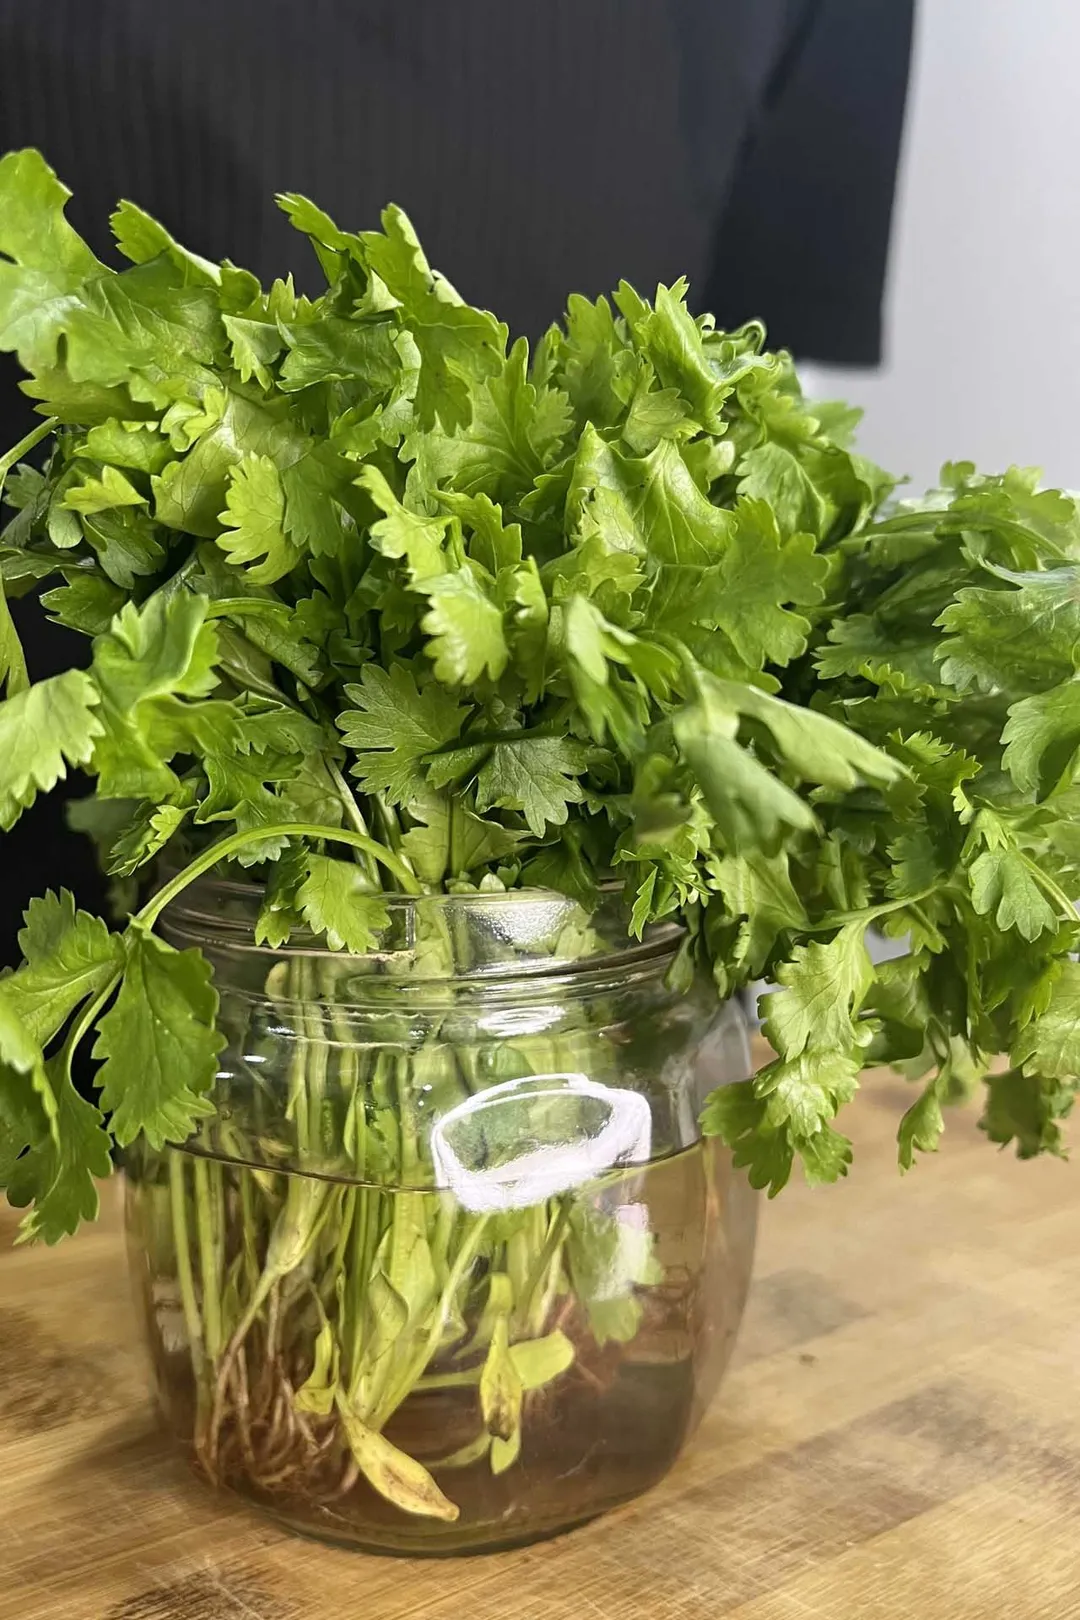 cilantro in a jar of water